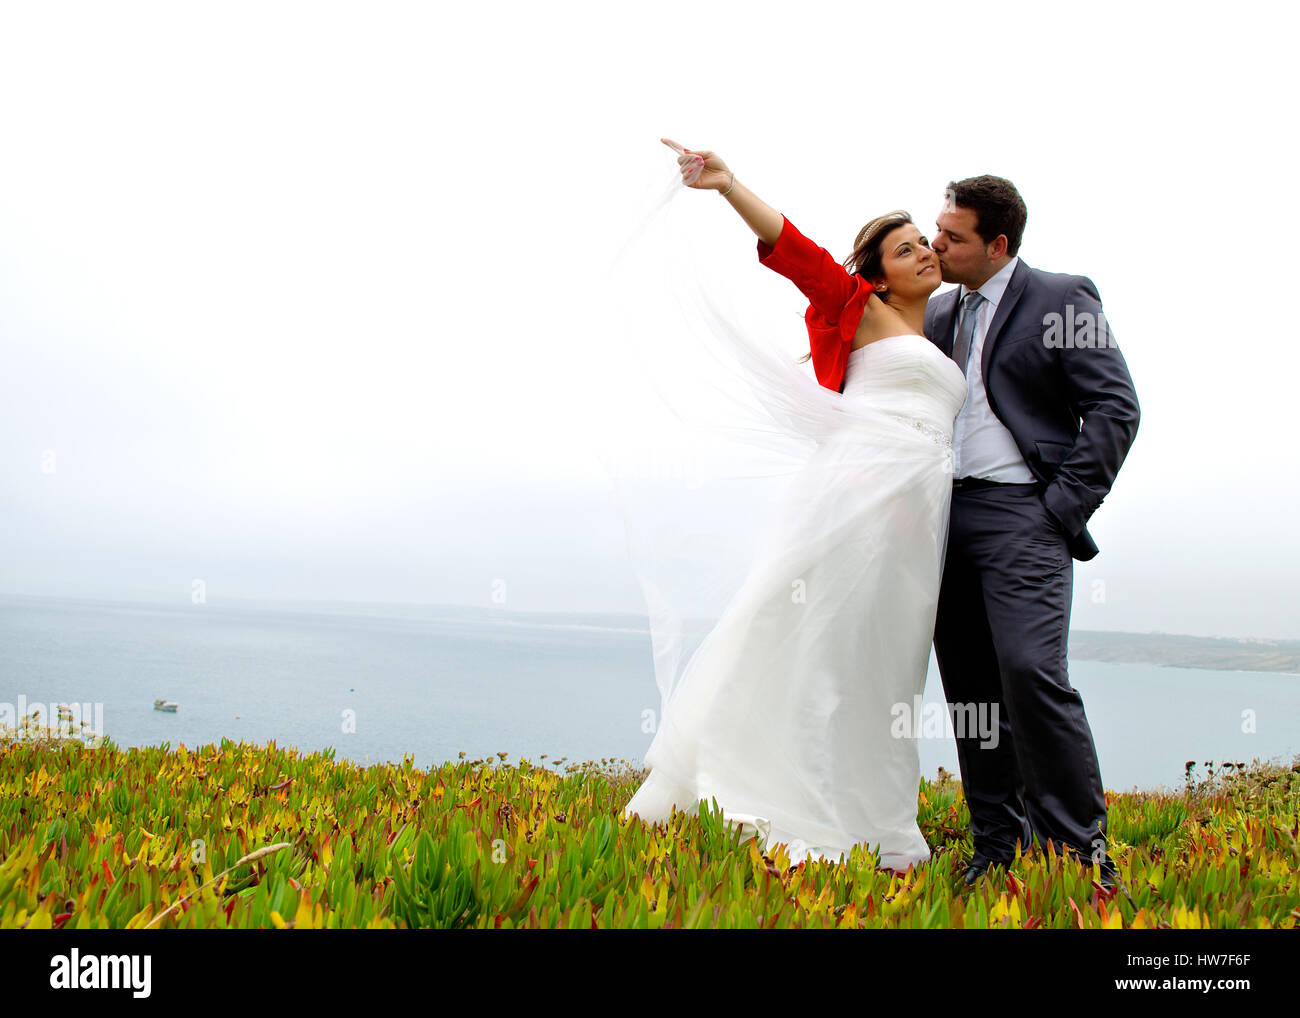 Groom´s couple dating outdoor Stock Photo